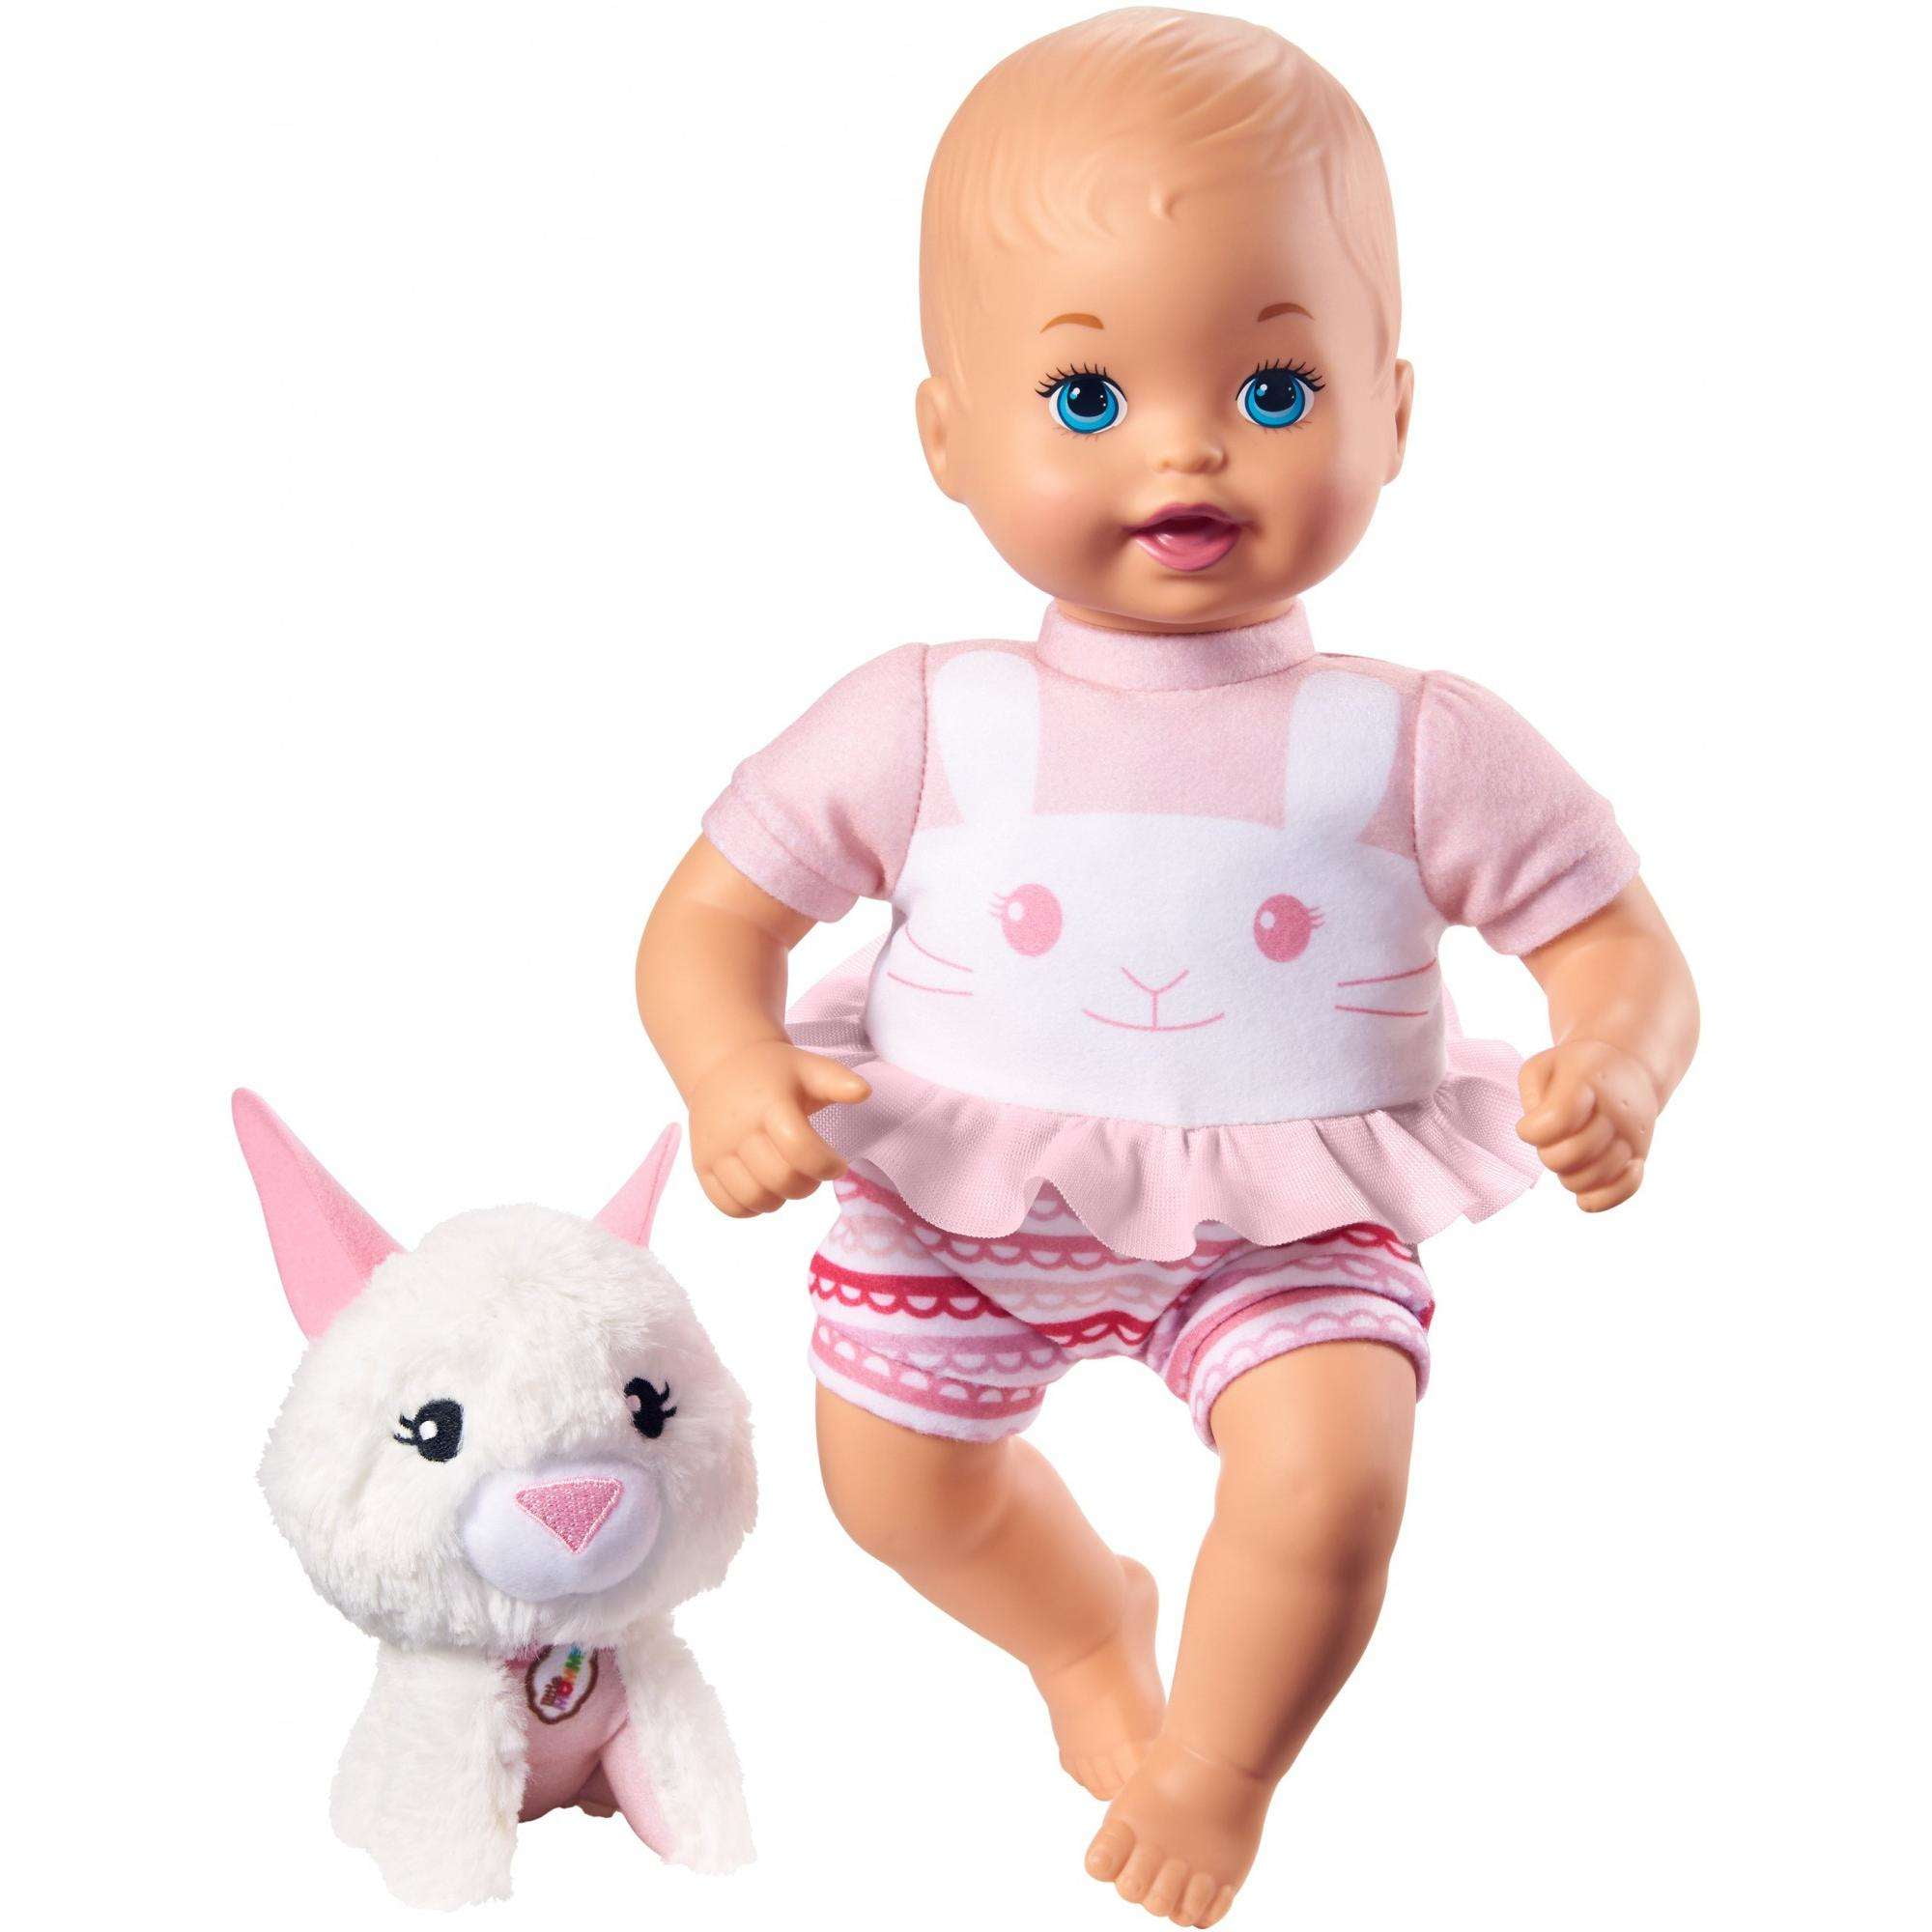 little mommy goodnight snuggles baby doll